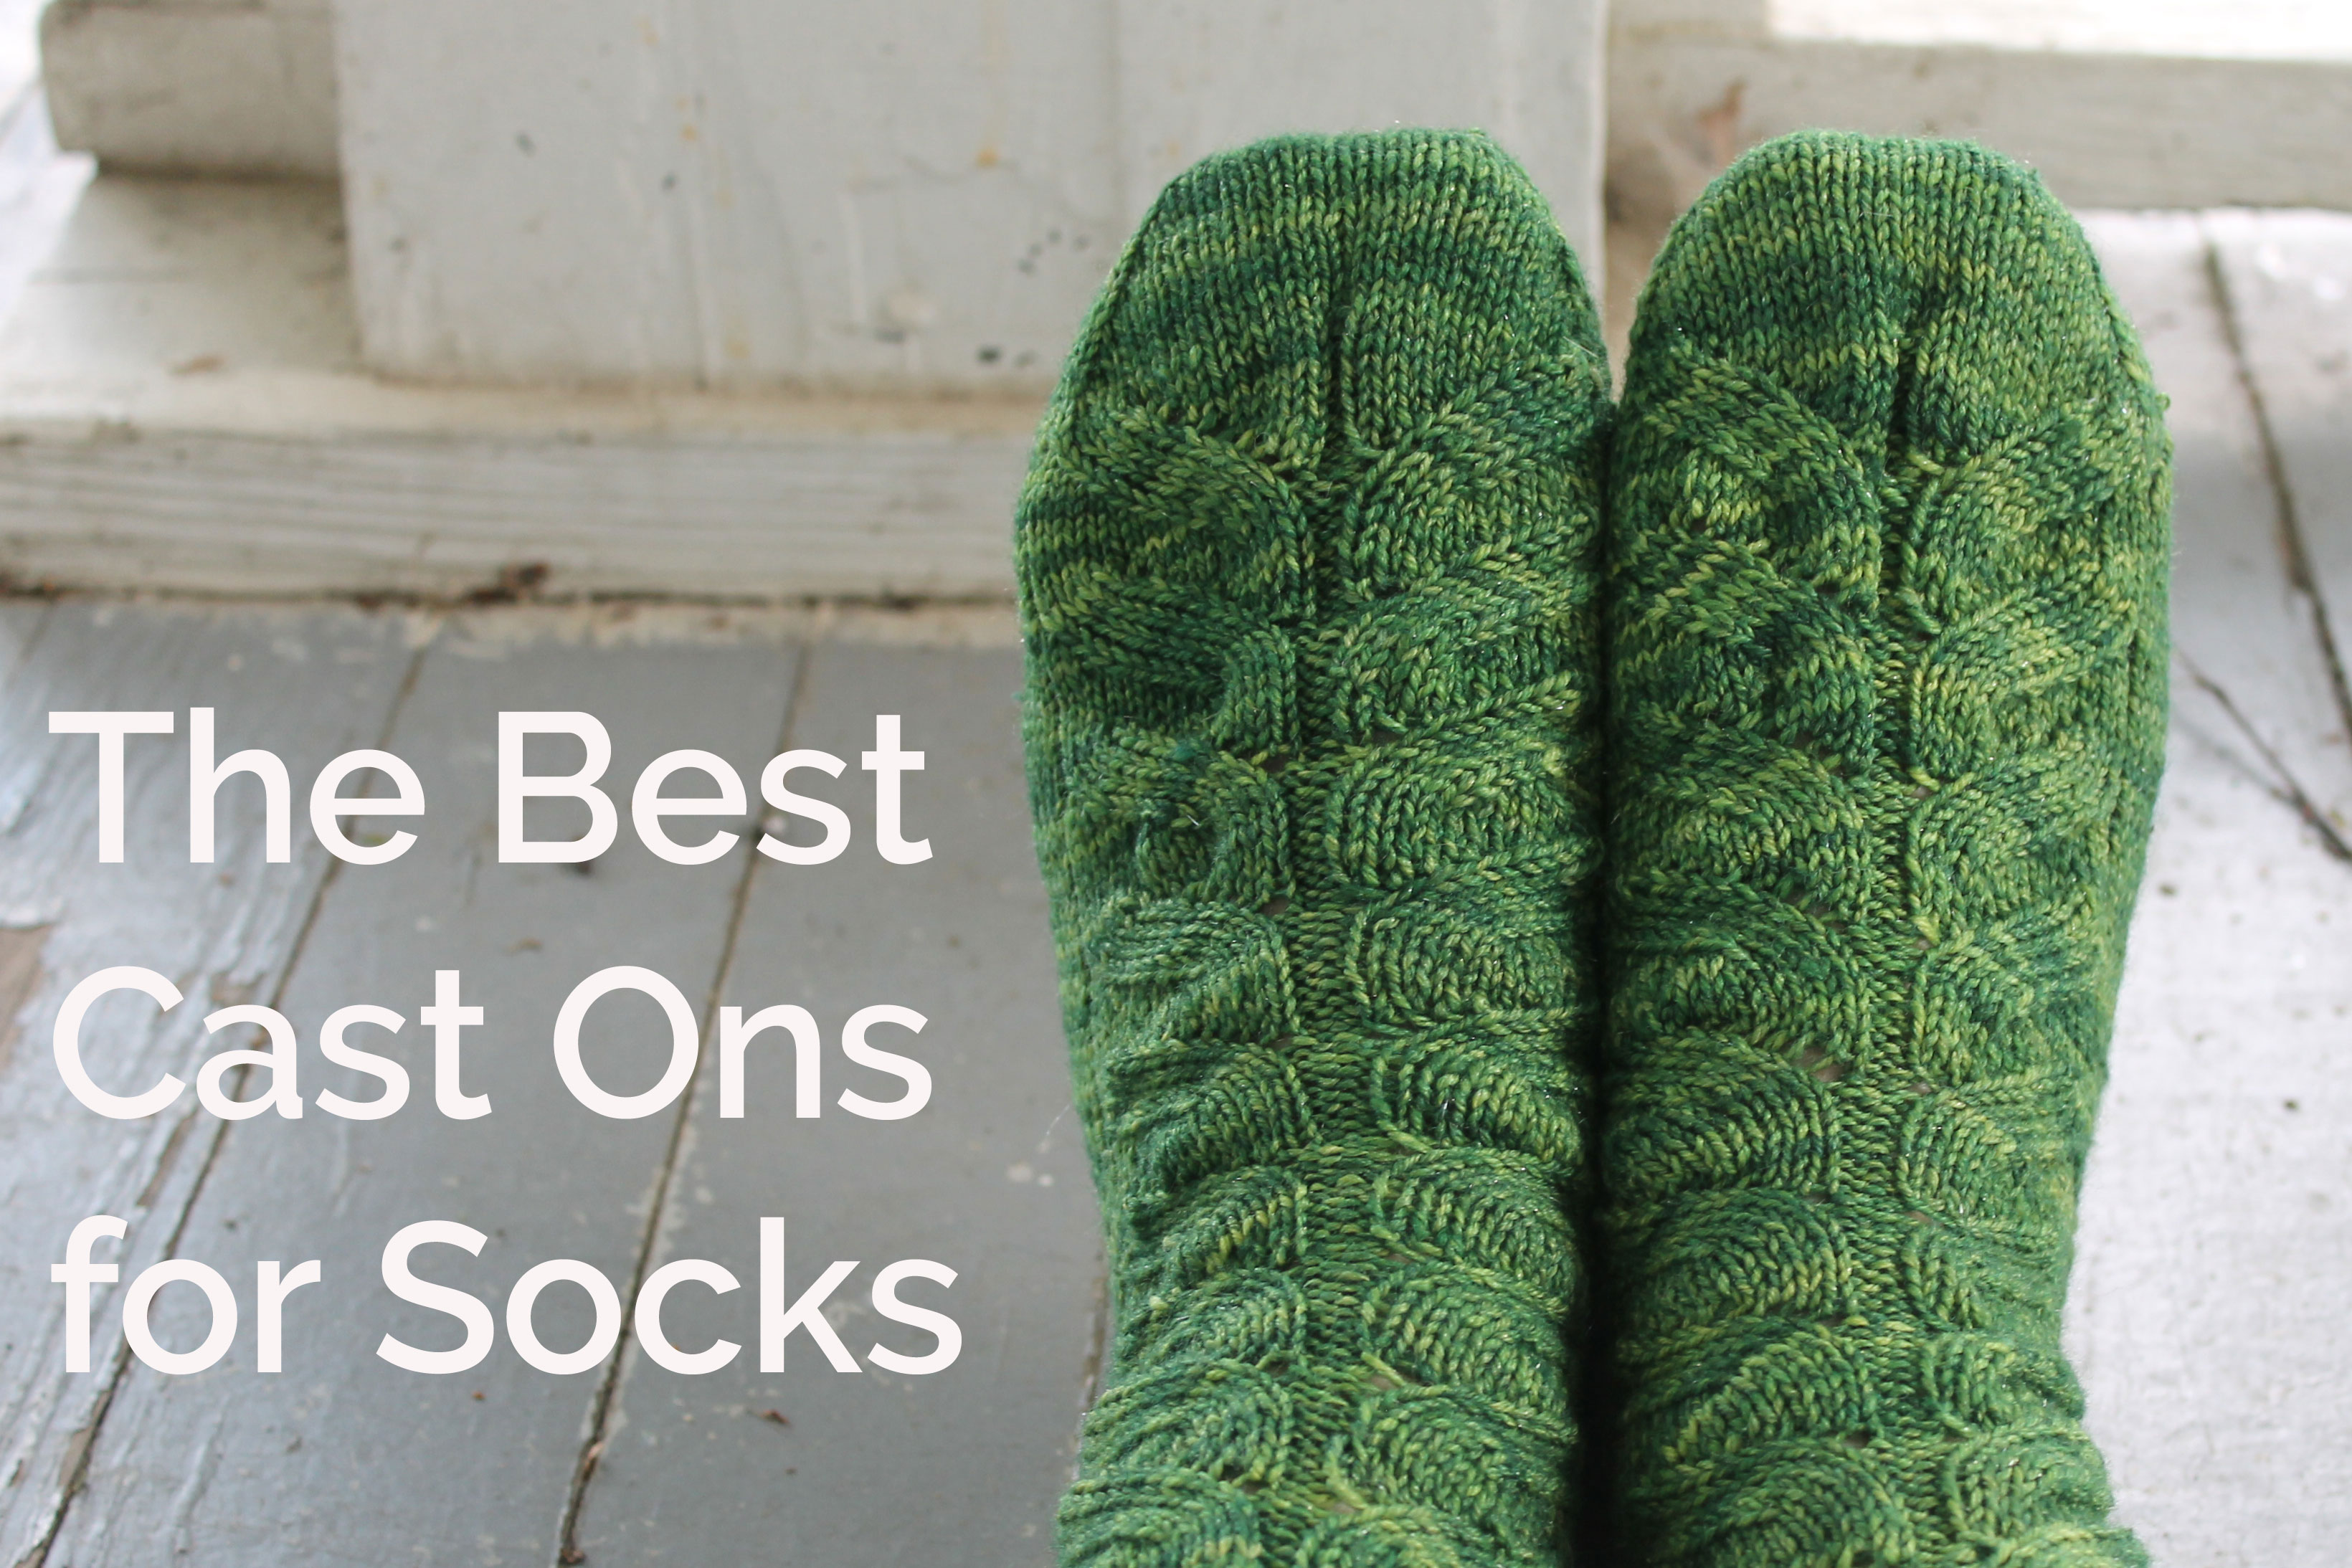 The Best Cast-Ons for Socks